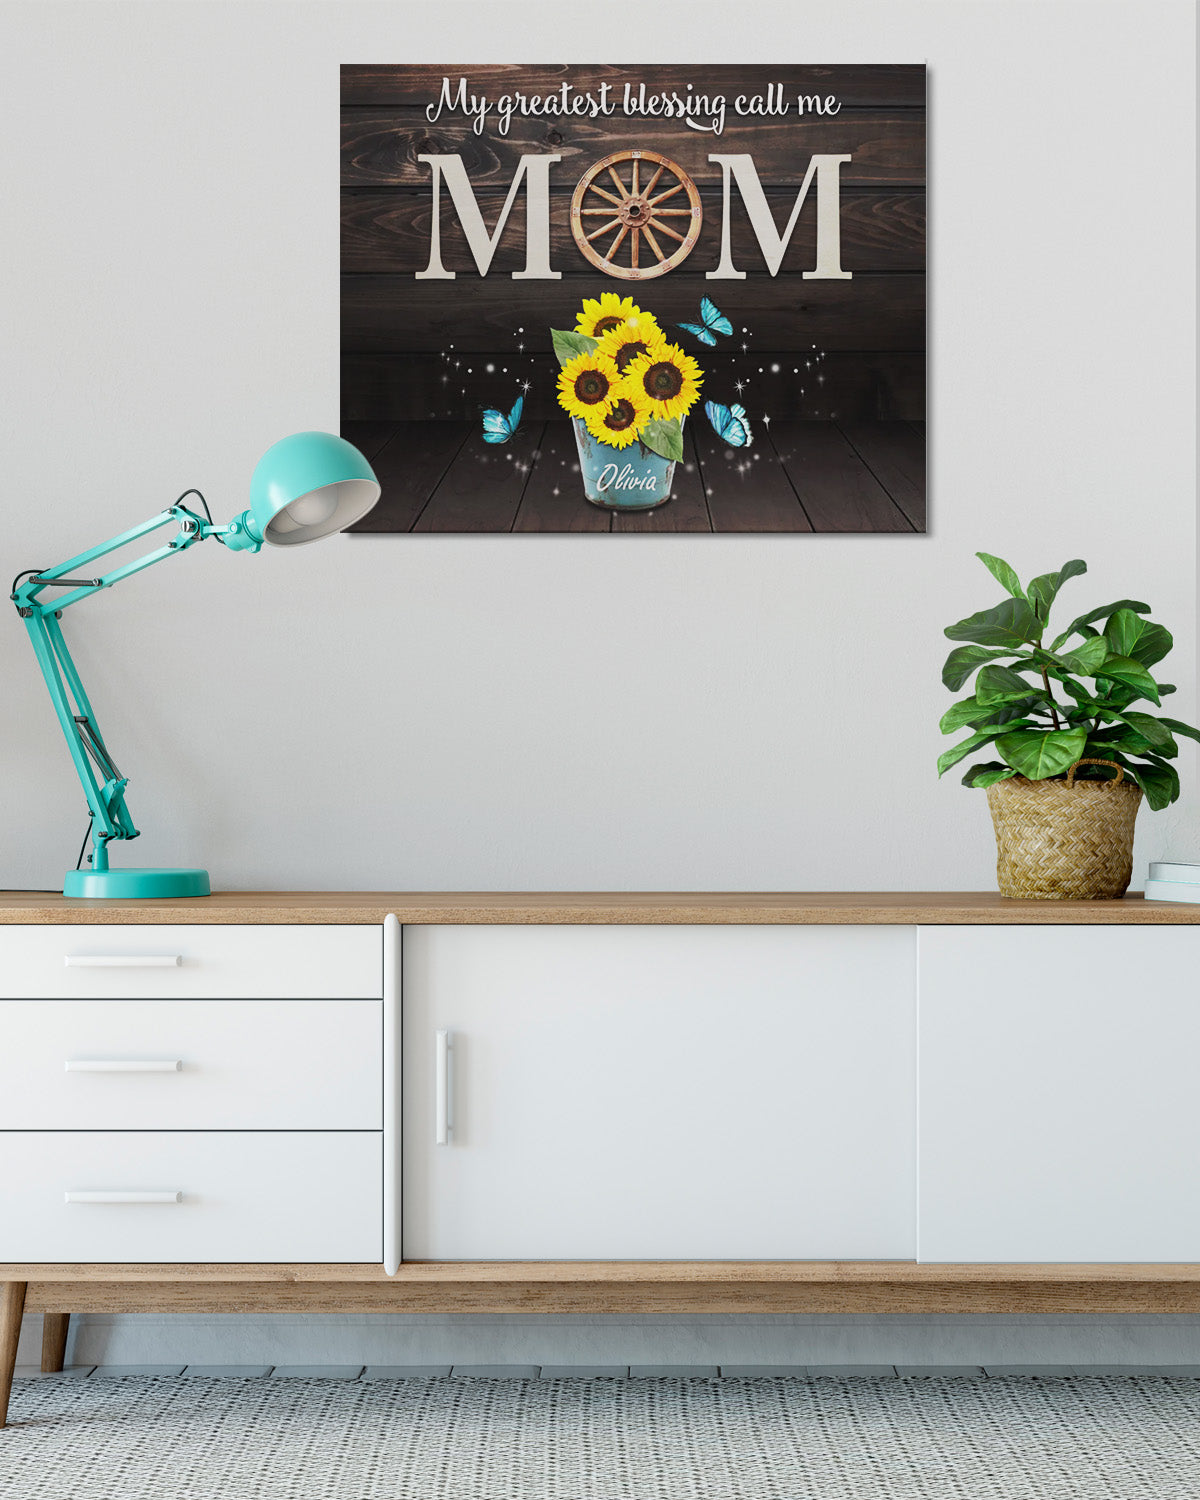 Customizable Mom Greatest Blessings Wall Art Canvas - Mother Personalized Custom Horizontal Canvas